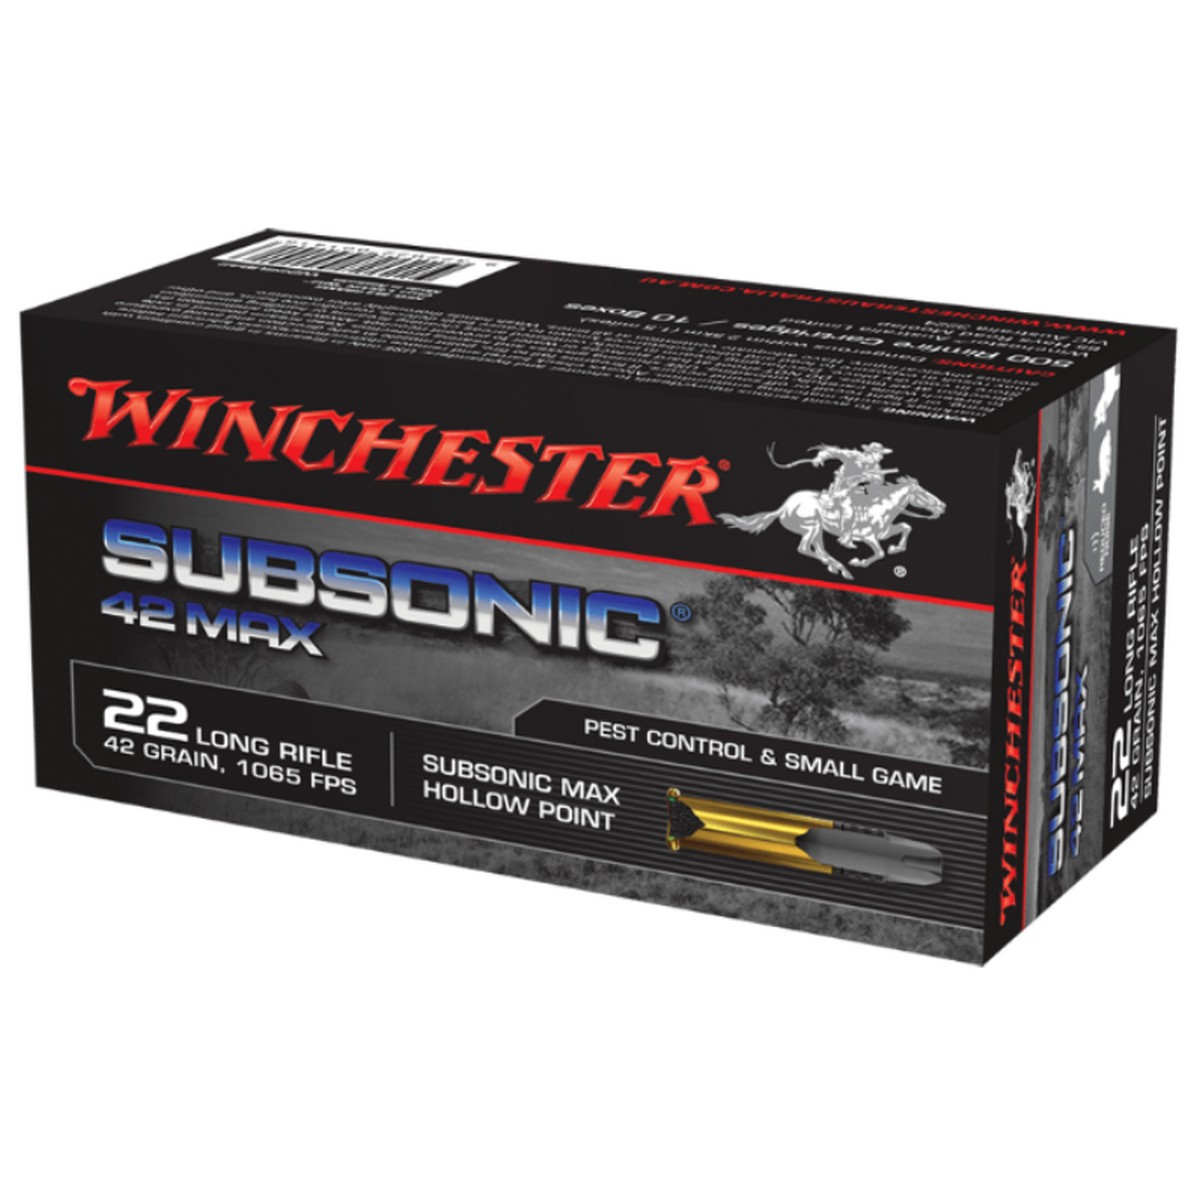 chester Subsonic Max 22 LR 42 GR HP 1065 FPS 50 Rd Ammo